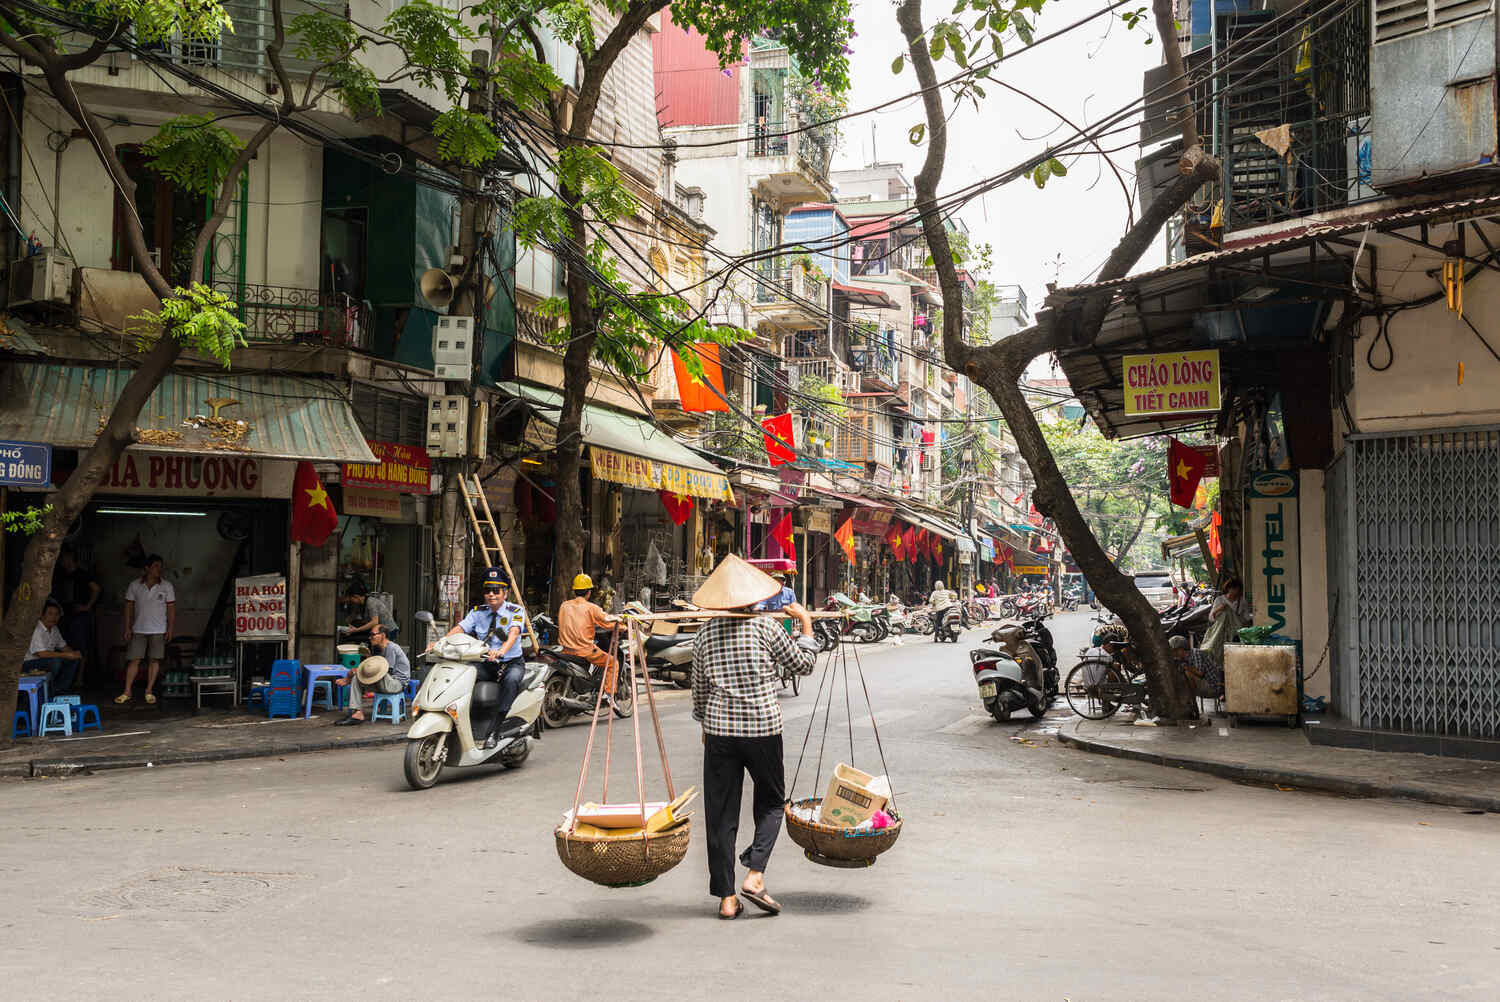 Street vendor carrying baskets on a shoulder pole, walking through a busy Hanoi street with shops and traffic.